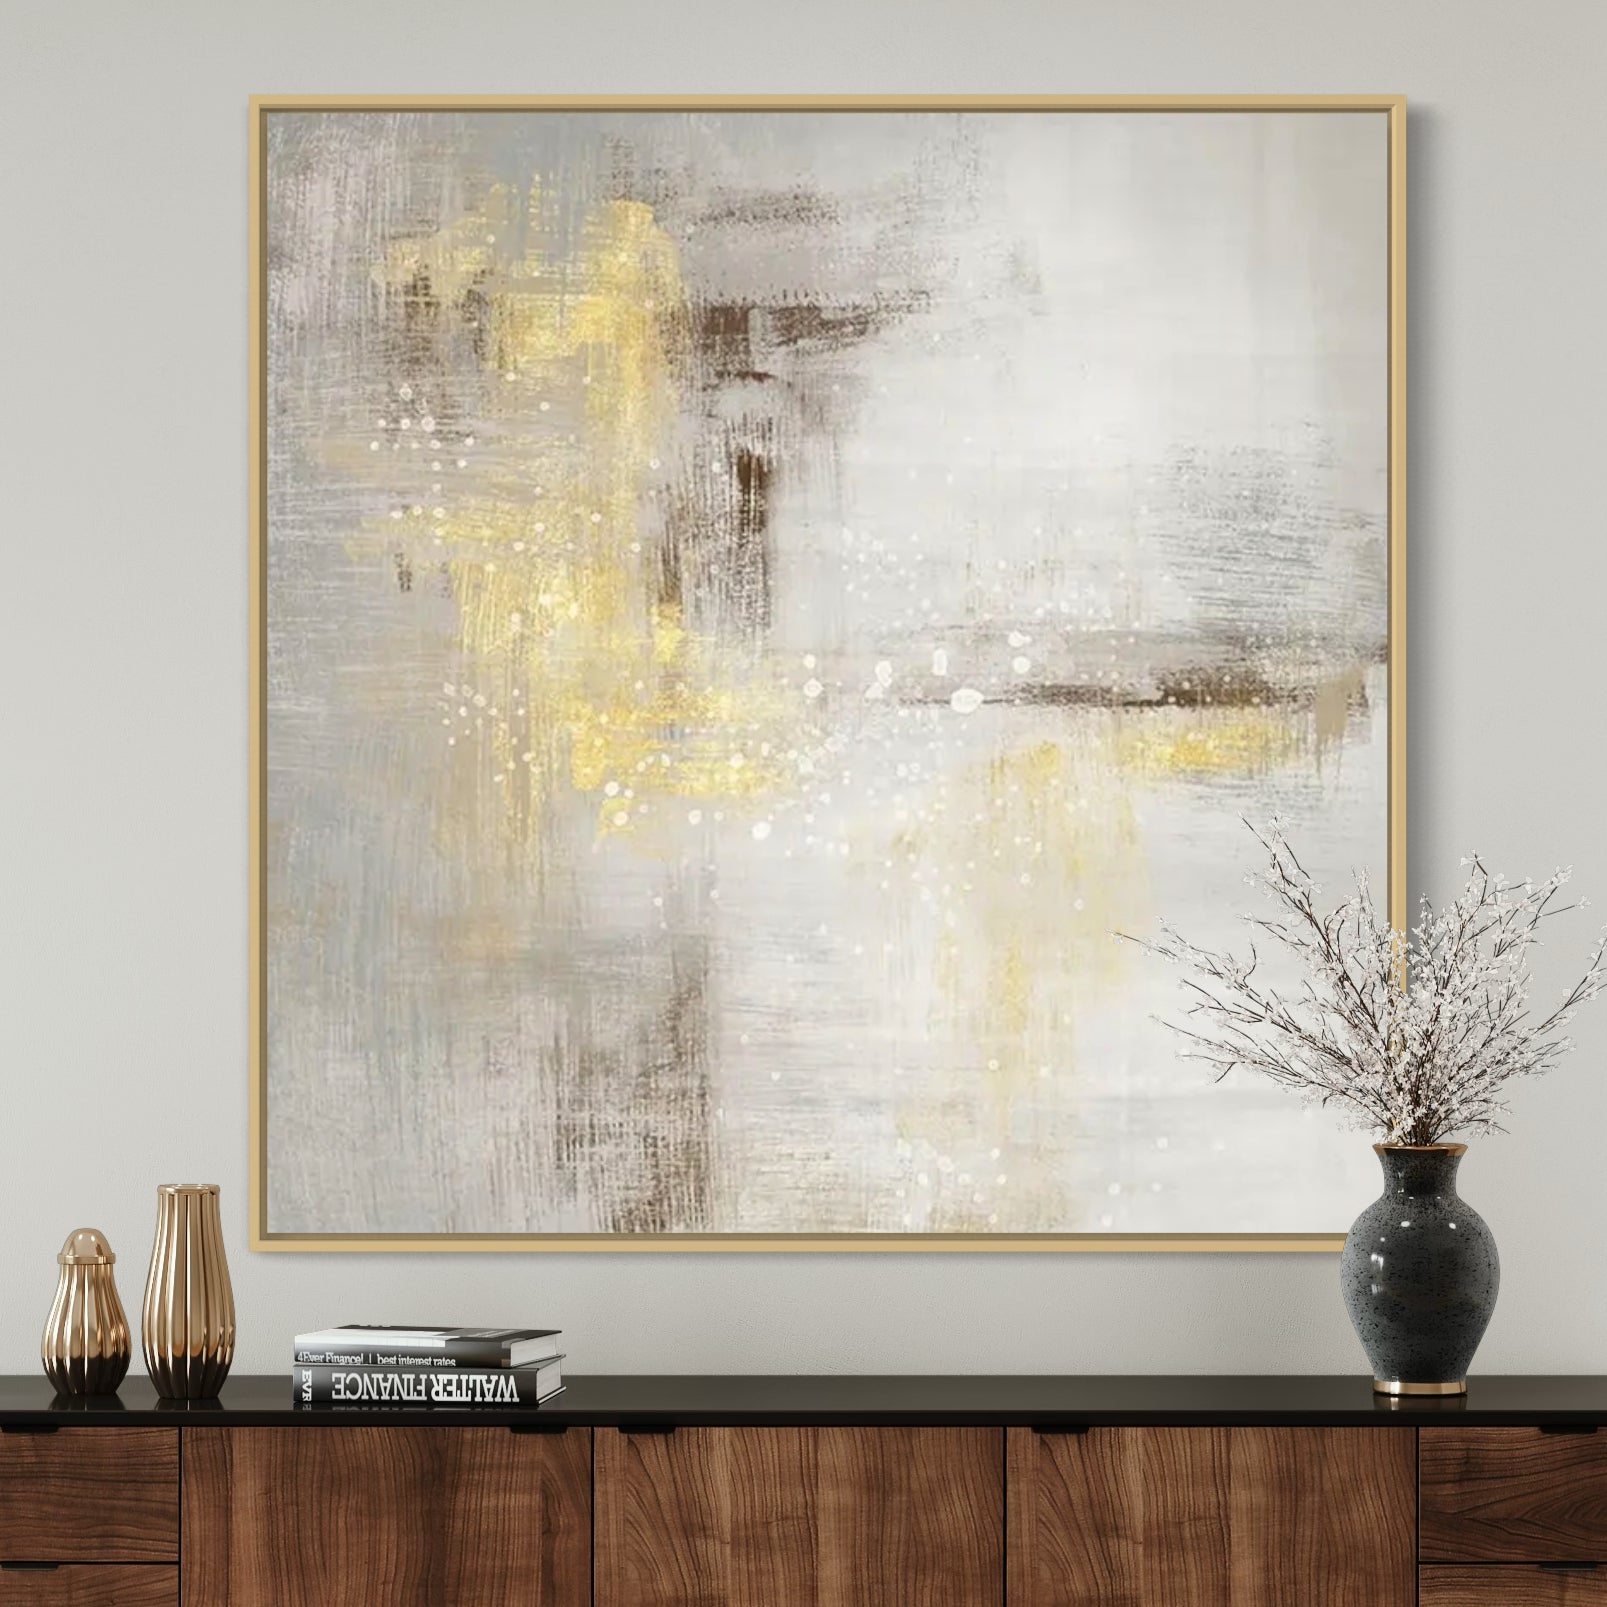 The World Of Light, Champagne / 180x180cm